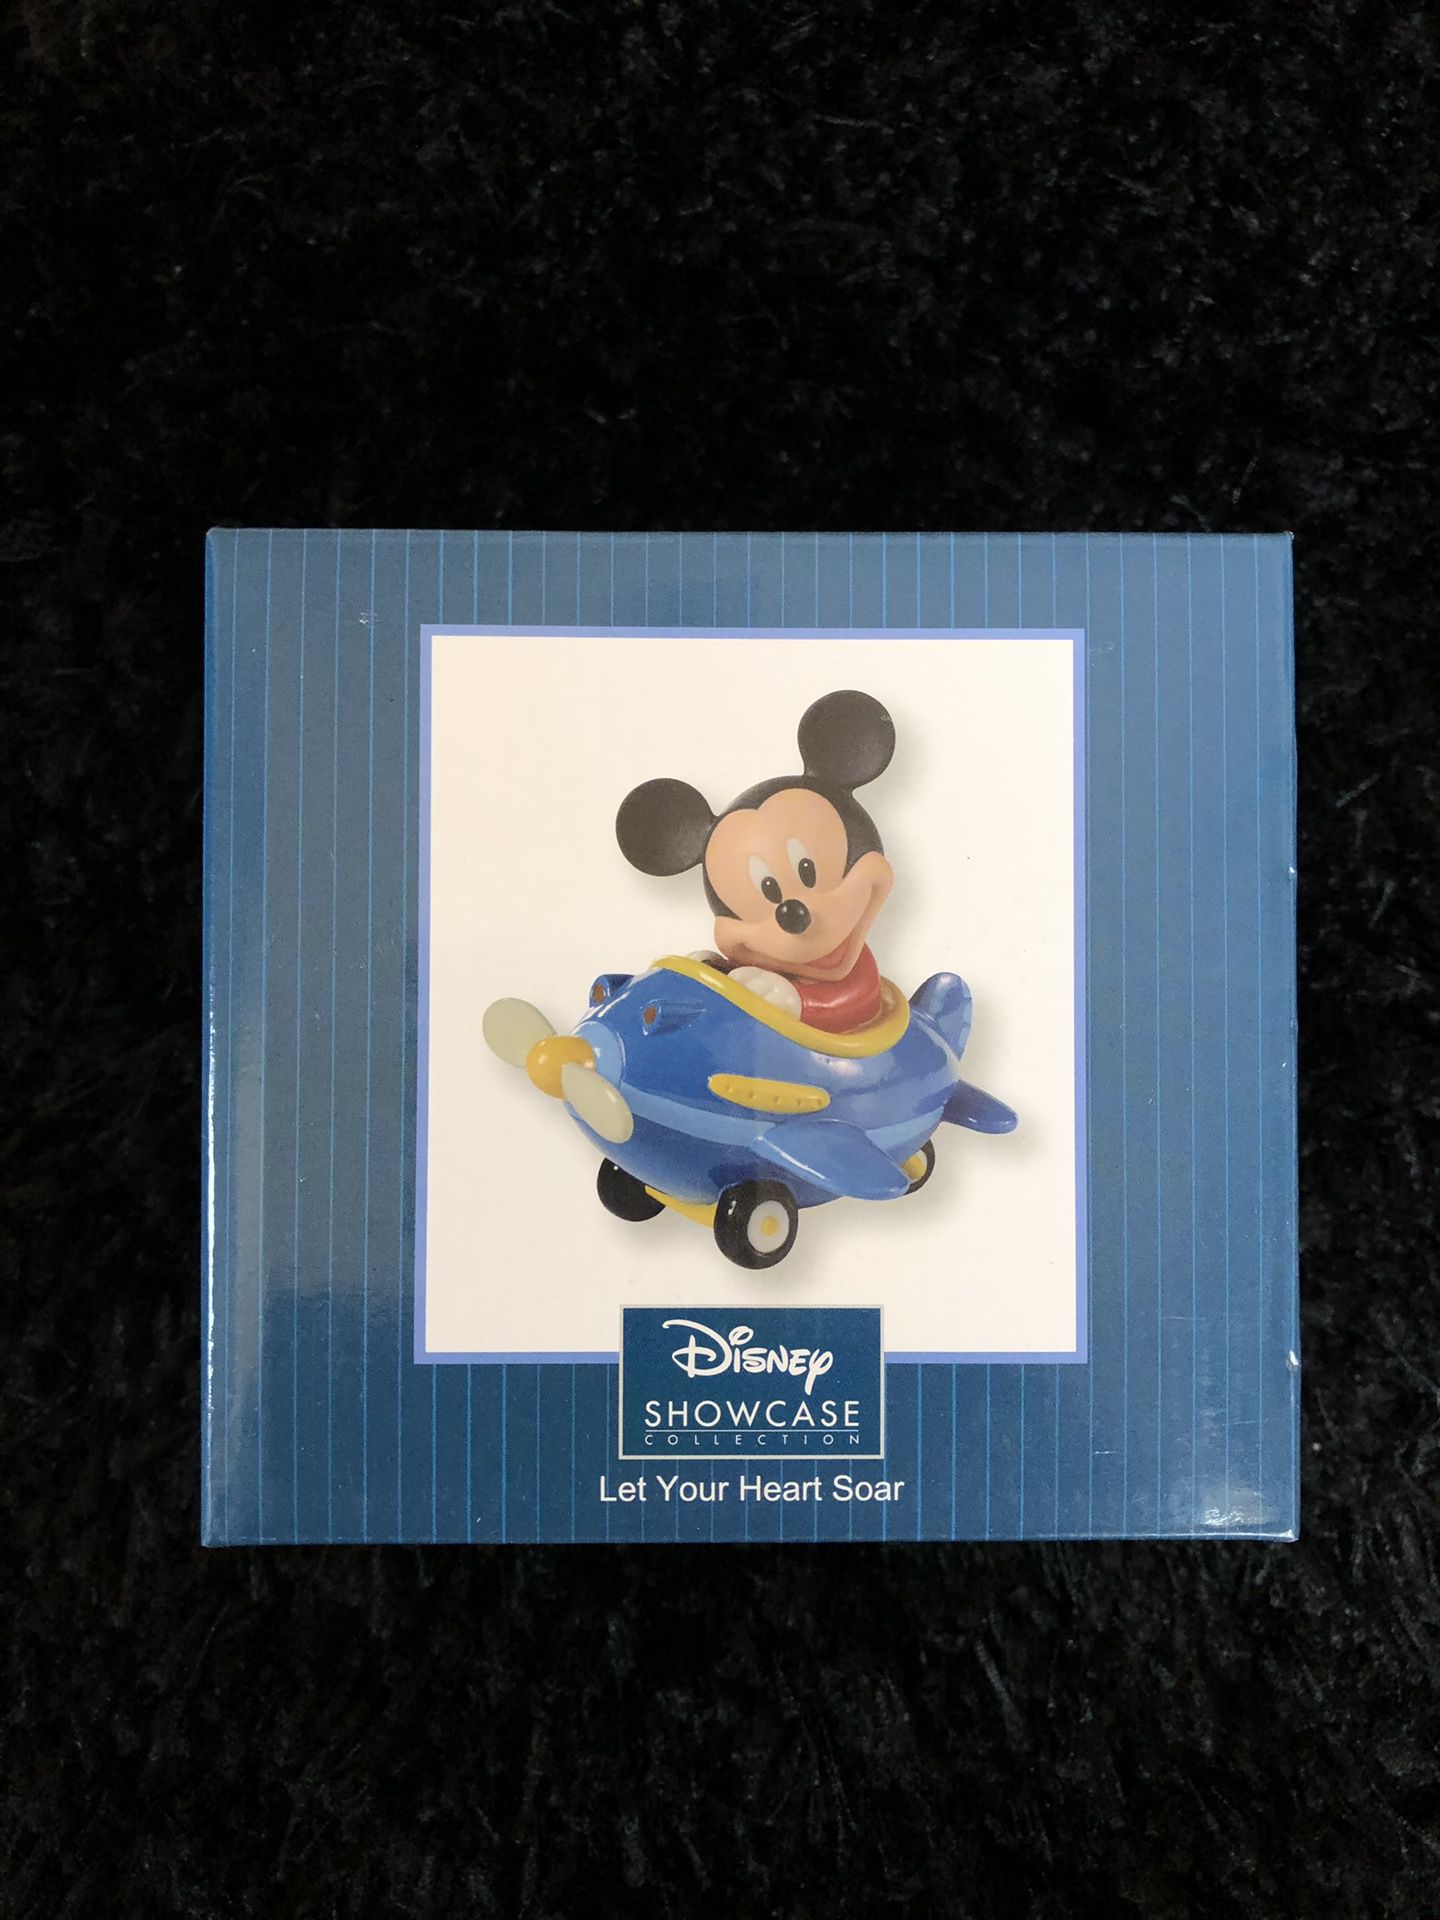 Precious Moments Disney Showcase Collection, Let Your Heart Soar Mickey Mouse